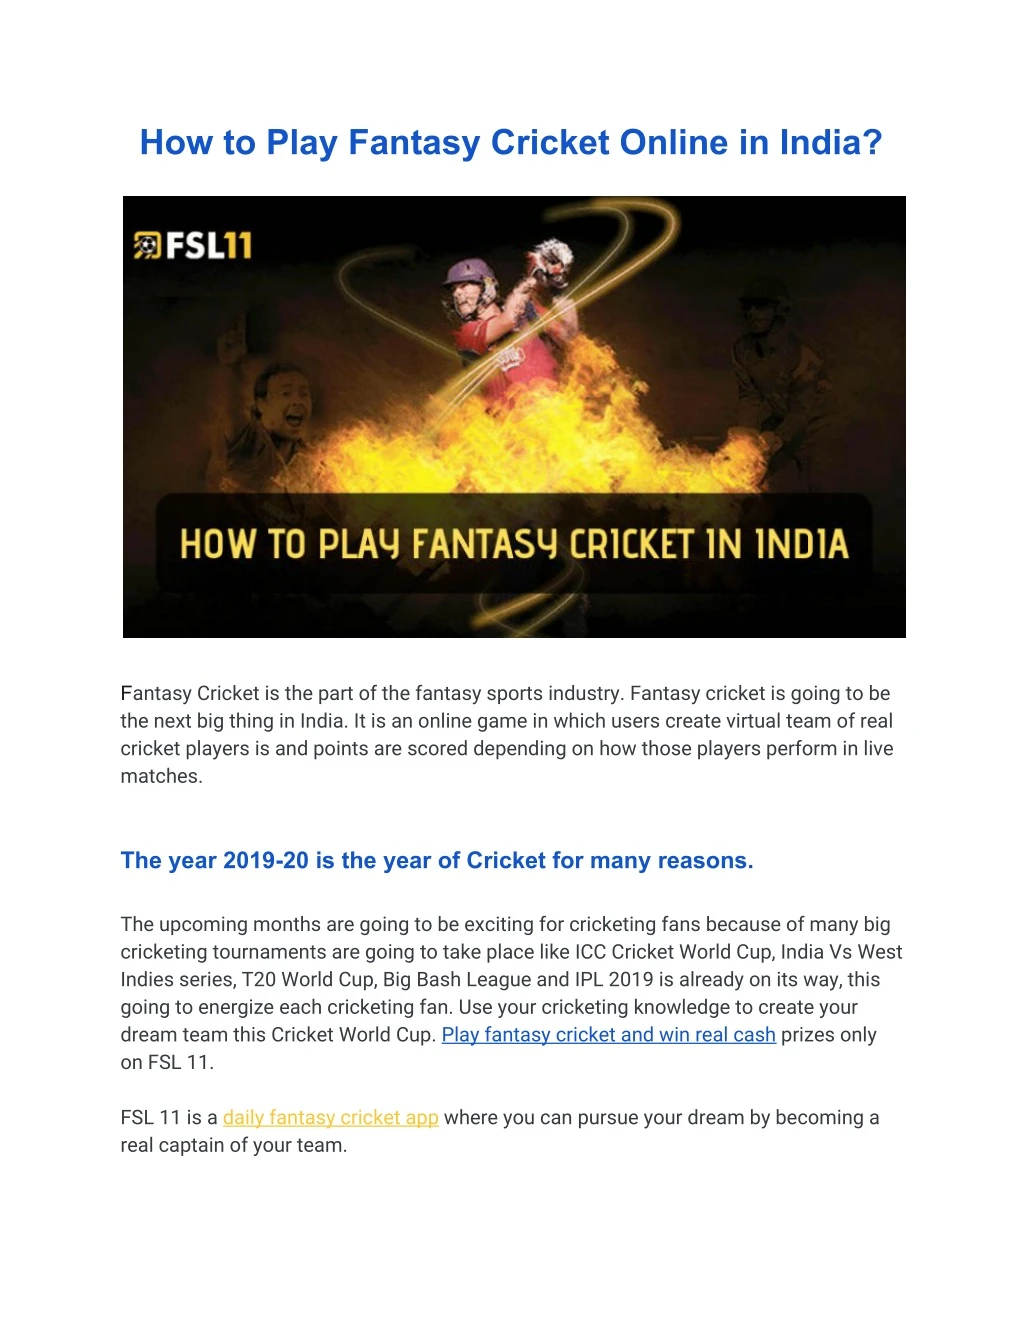 how to play fantasy cricket online in india